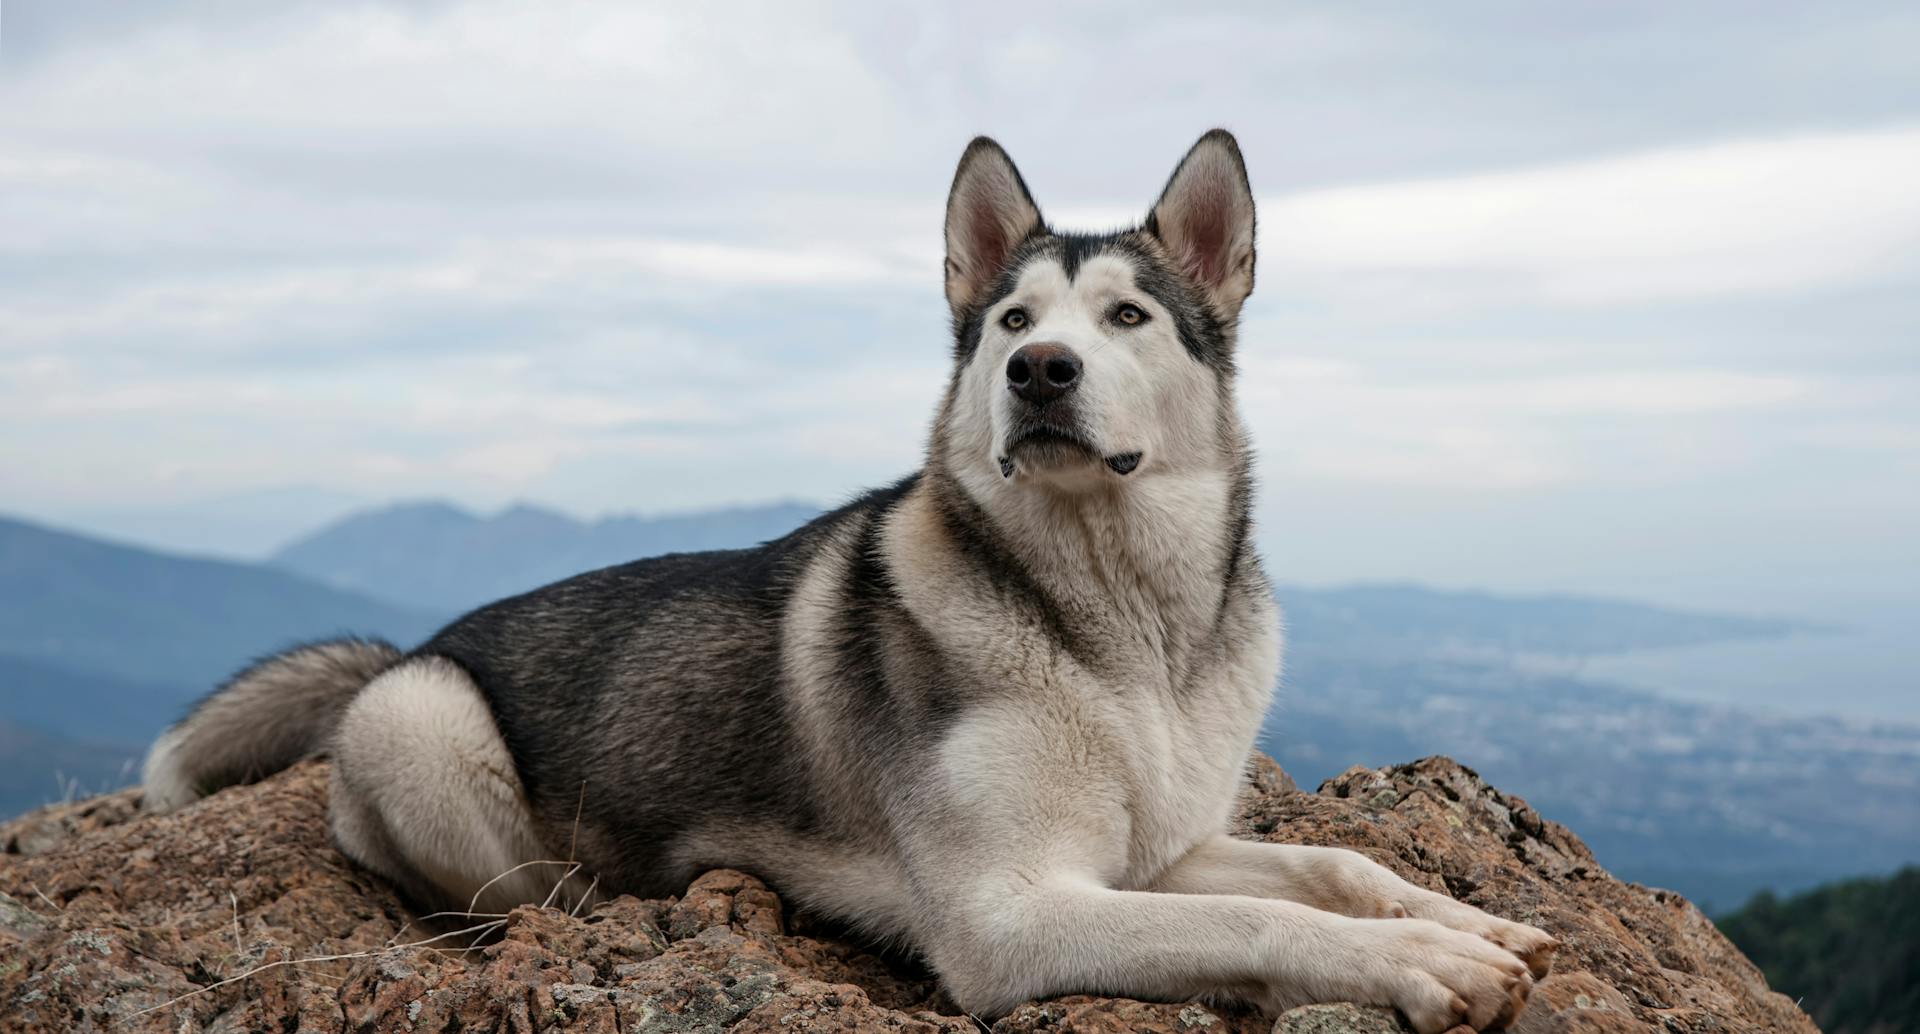 A black and white dog in front of a mountainous background